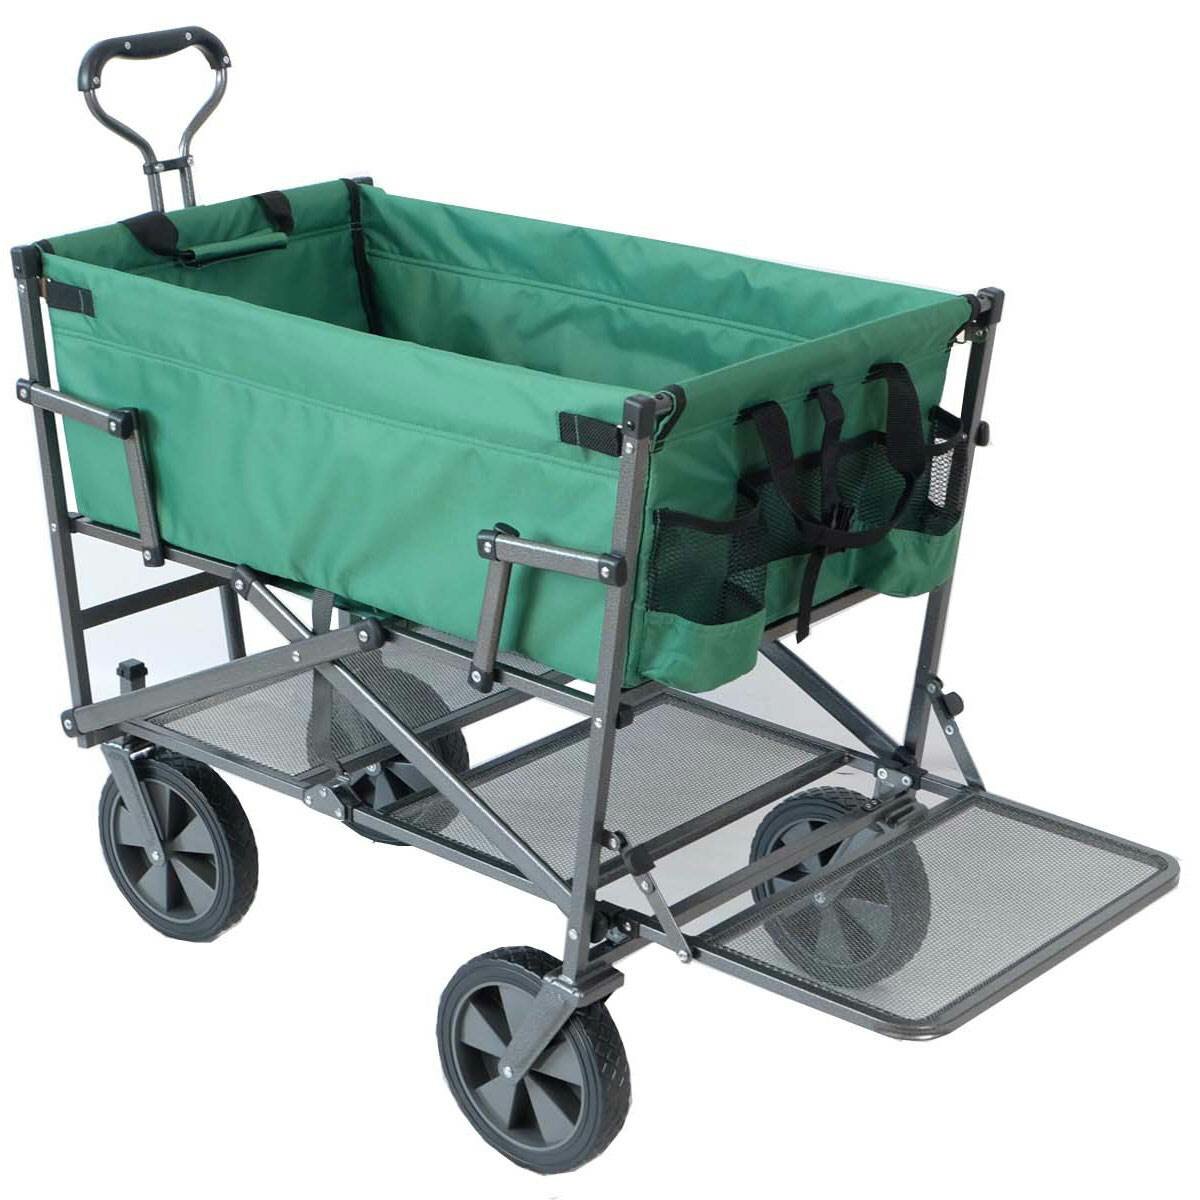 Mac Sports Collapsible Double Decker Garden Utility Wagon & Extended Lower Shelf 2 Pack 